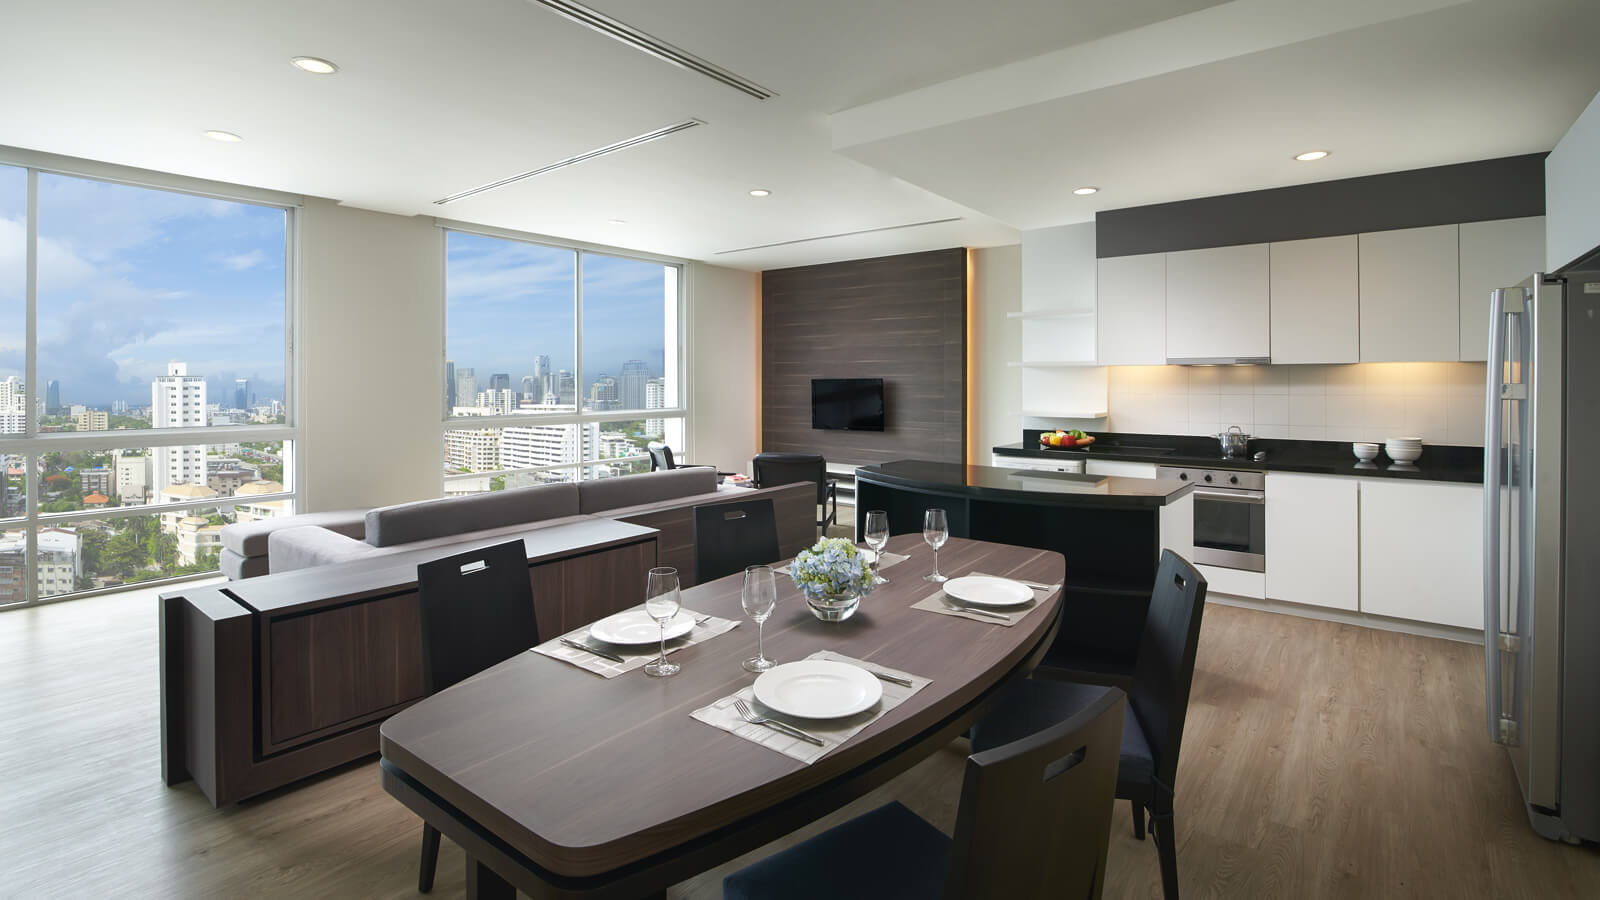 Three Bedroom Deluxe - Dining and Living Area - ชามา สุขุมวิท กรุงเทพฯ